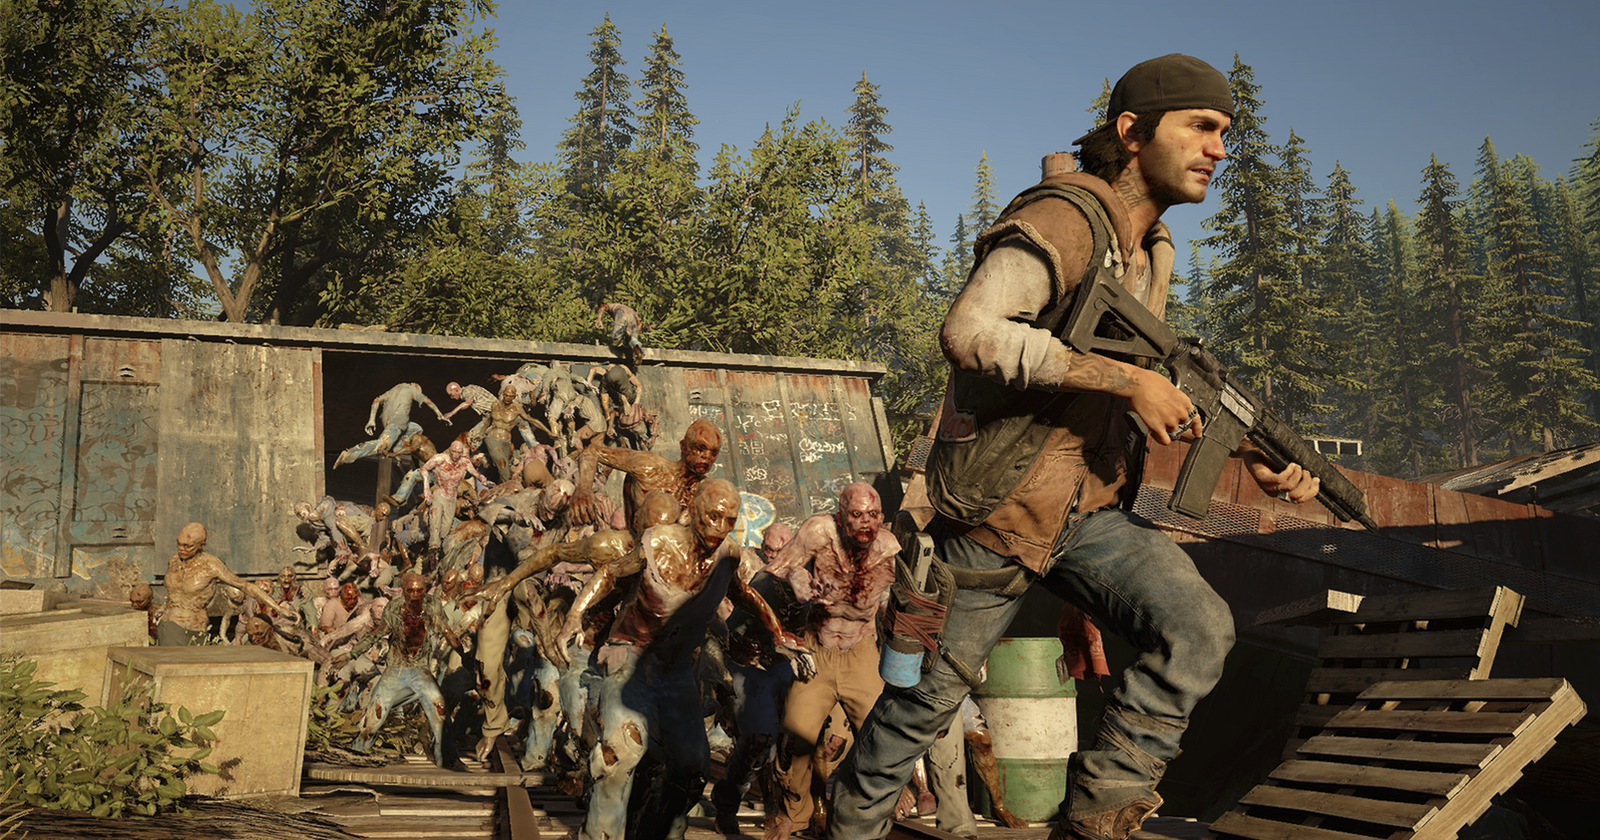 Why was Days Gone 2 cancelled?